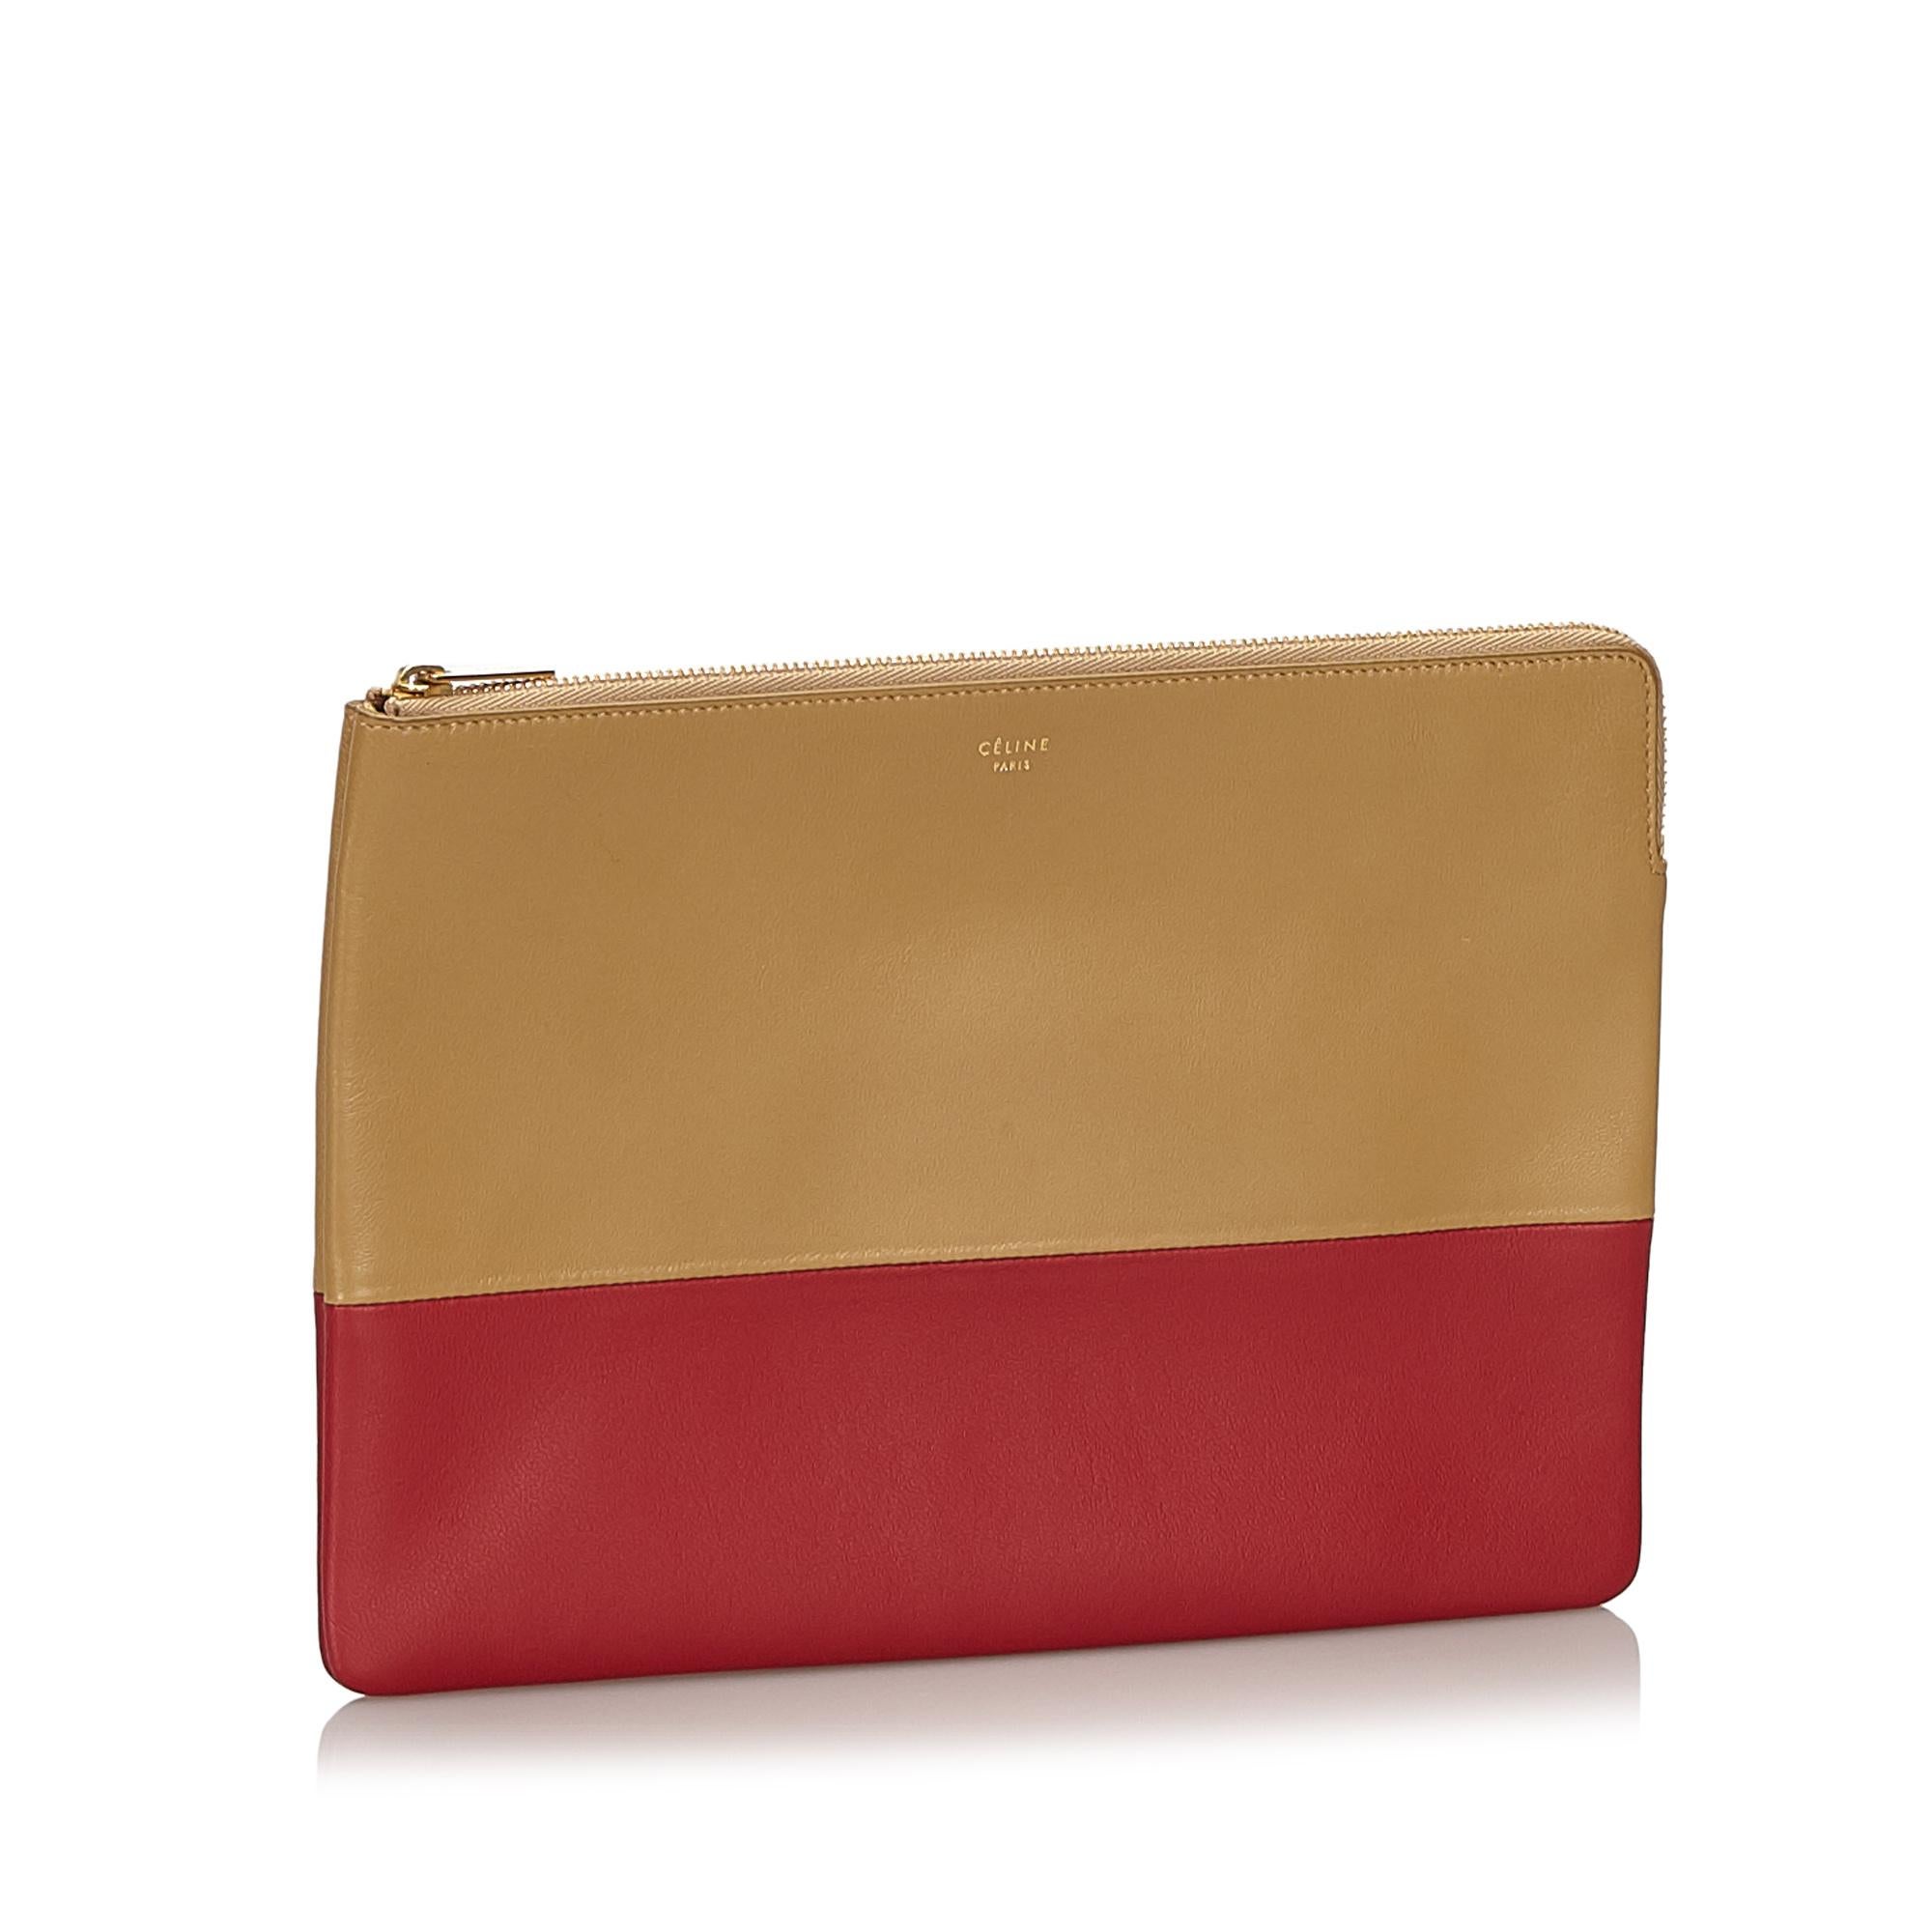 This clutch bag features a leather body and a top zip closure. It carries as AB condition rating.

Inclusions: 
Dust Bag
Dimensions:
Length: 18.00 cm
Width: 25.00 cm
Depth: 0.70 cm

Material: Leather x Others
Country of Origin: Italy

Order